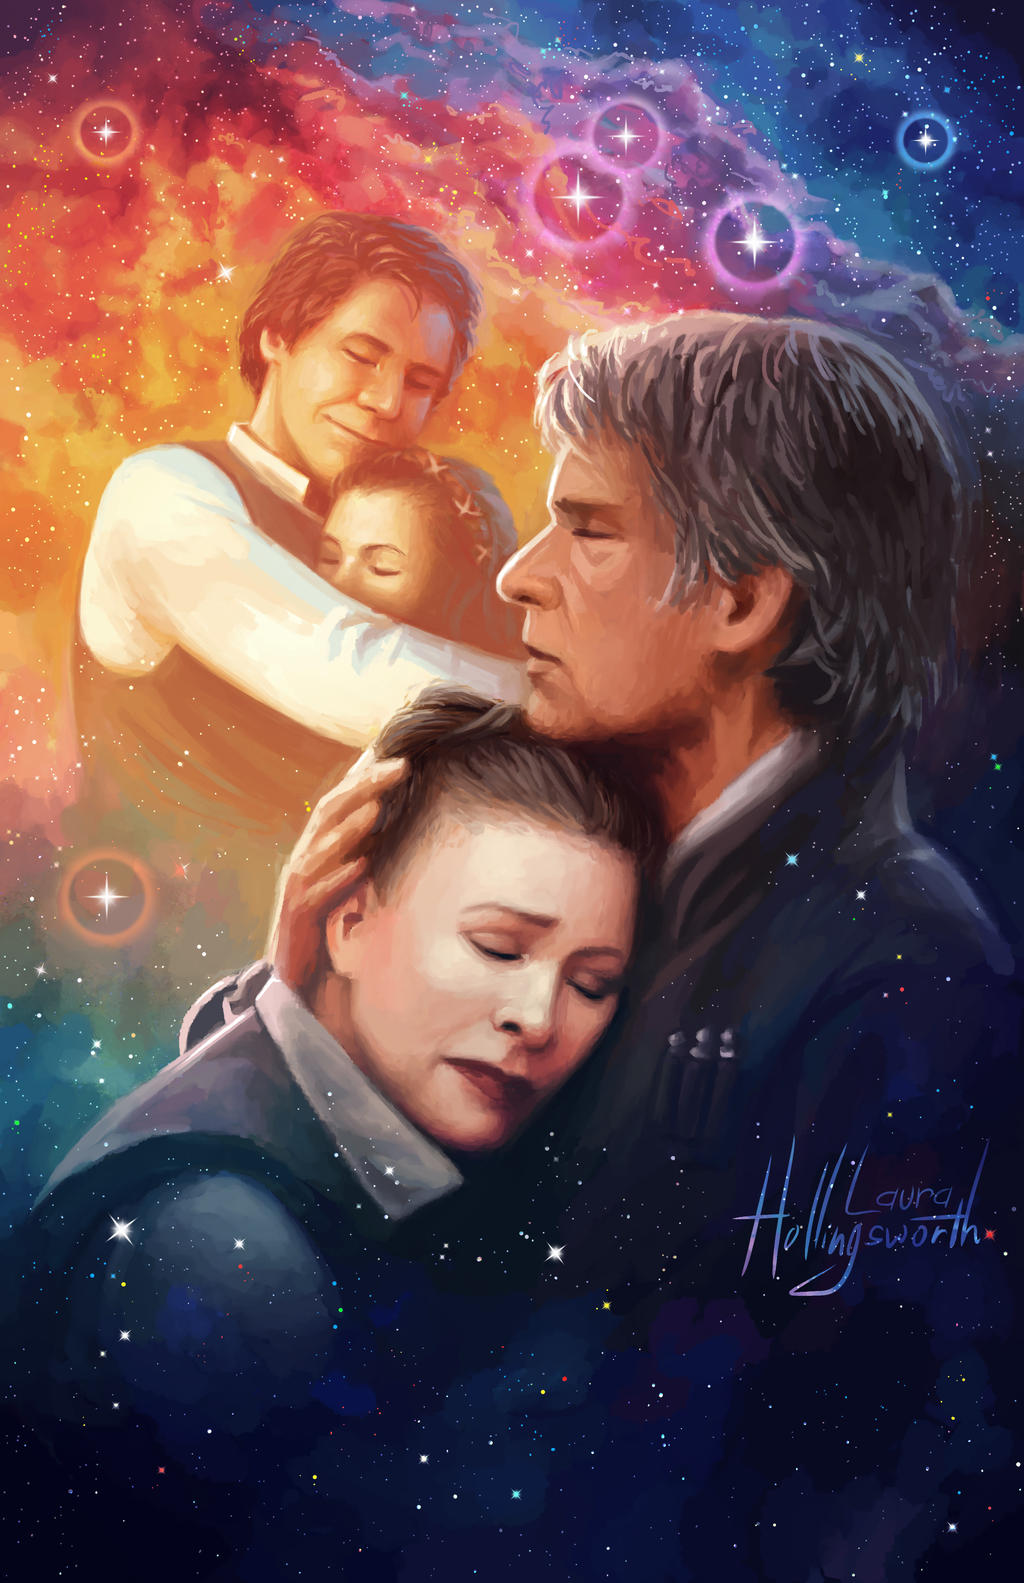 Star Wars The Force Awakens Leia And Han Solo By